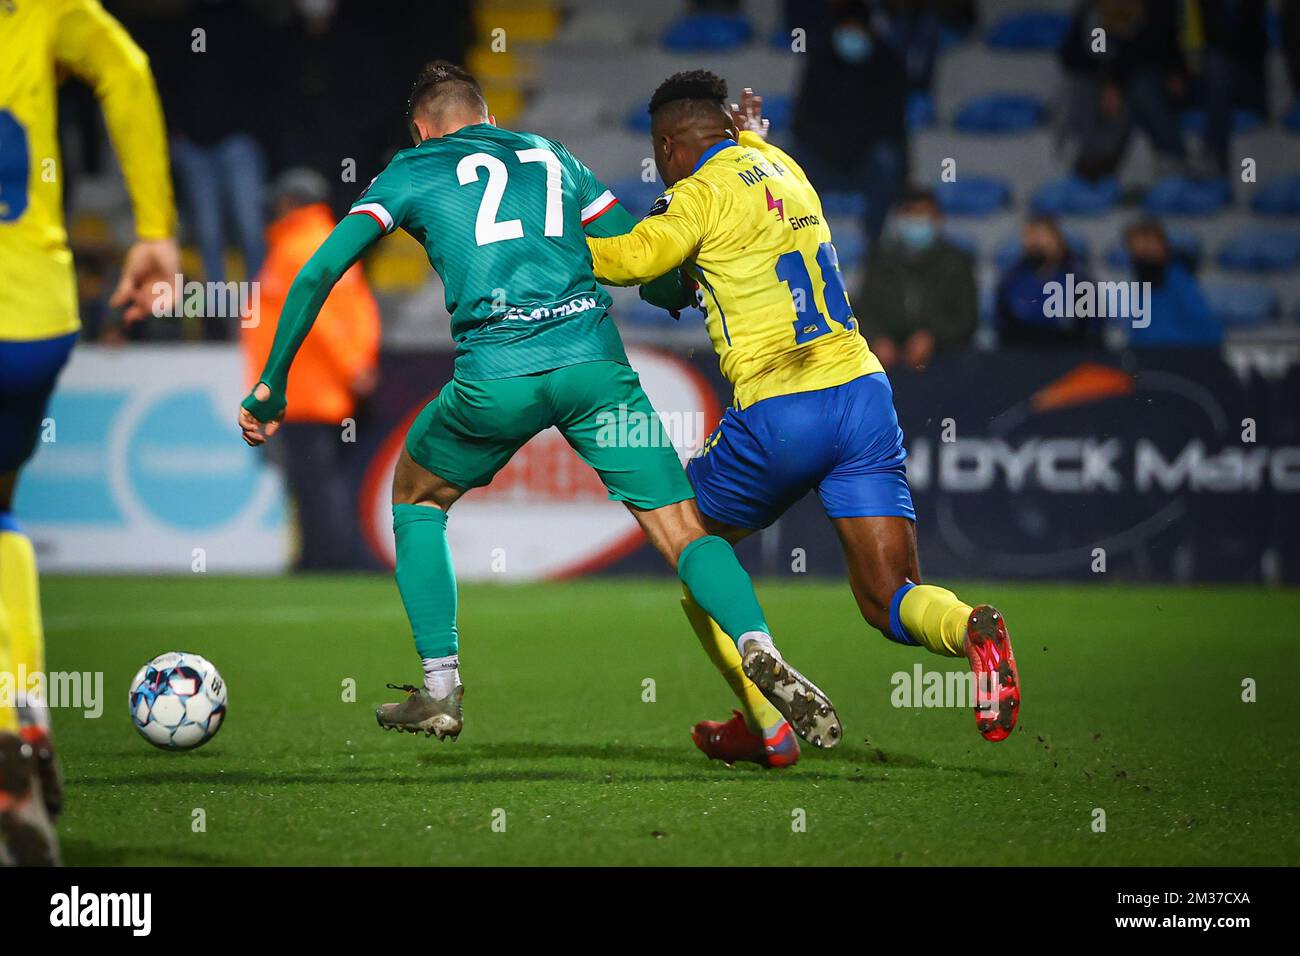 Virton's Hugo Colella and Westerlo's Kouya Mabea fight for the ball during a soccer match between KVC Westerlo and RE Virton, Sunday 19 December 2021 in Westerlo, on day 16 of the '1B Pro League' second division of the Belgian soccer championship. BELGA PHOTO DAVID PINTENS Stock Photo